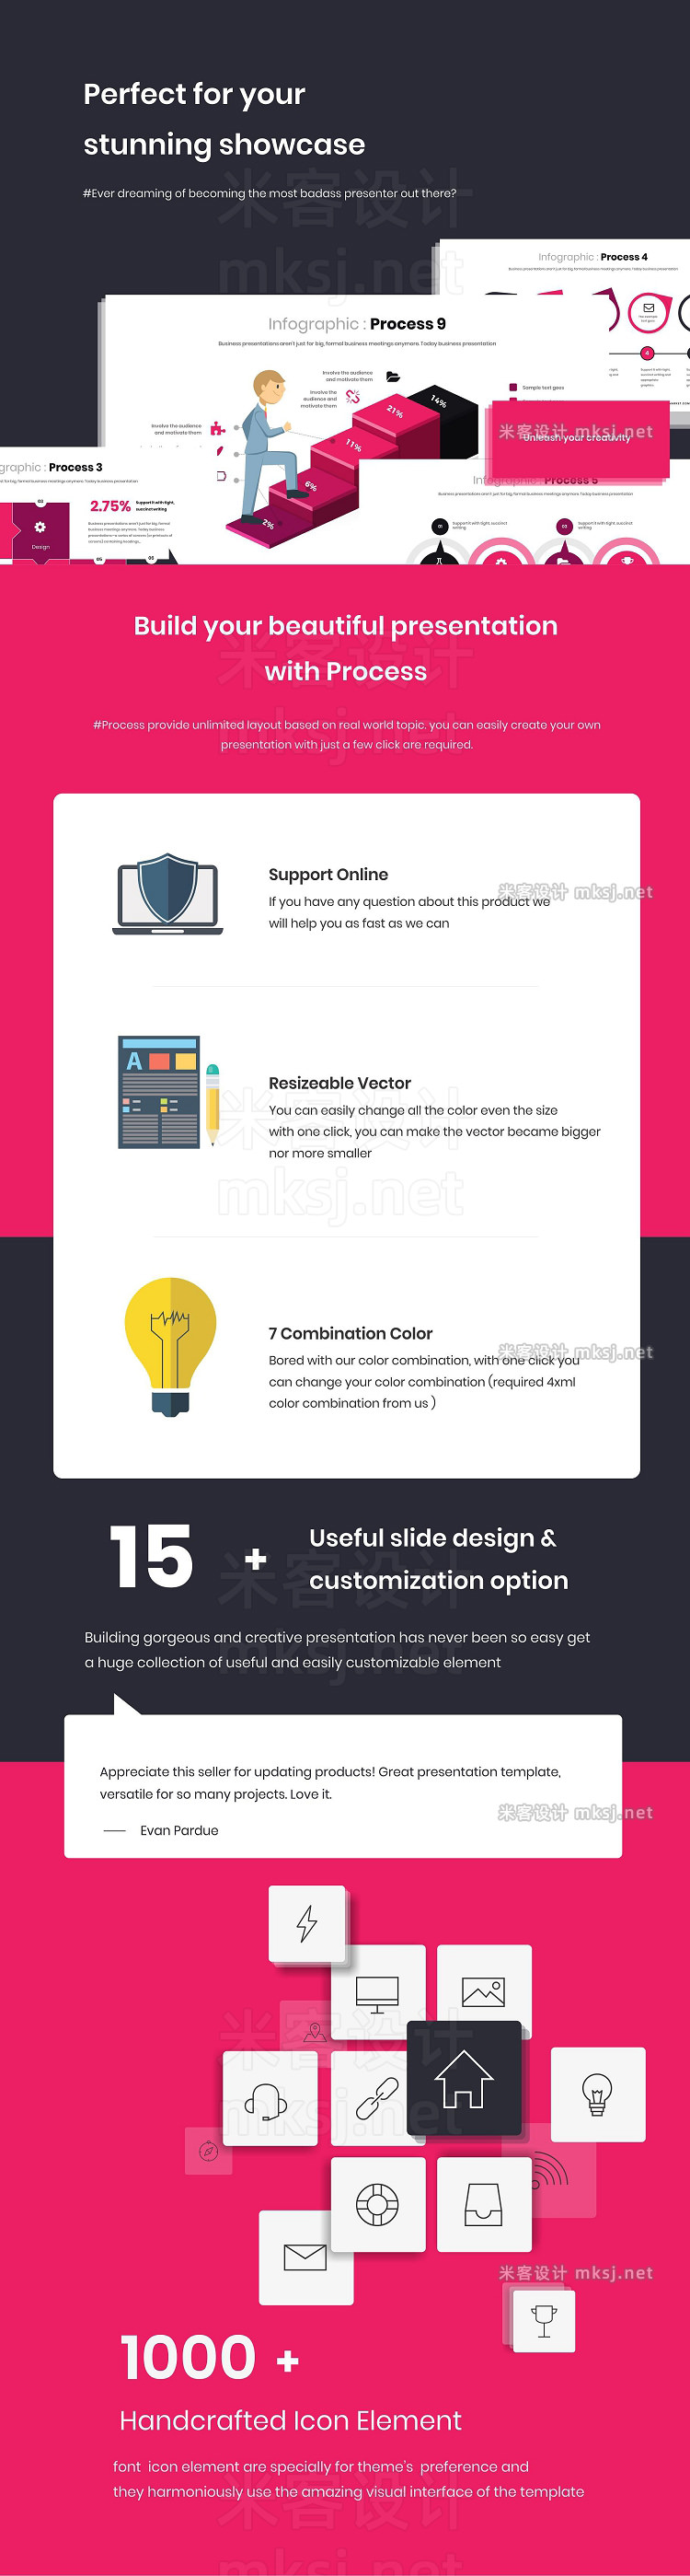 PPT模板 Process Infographic PowerPoint